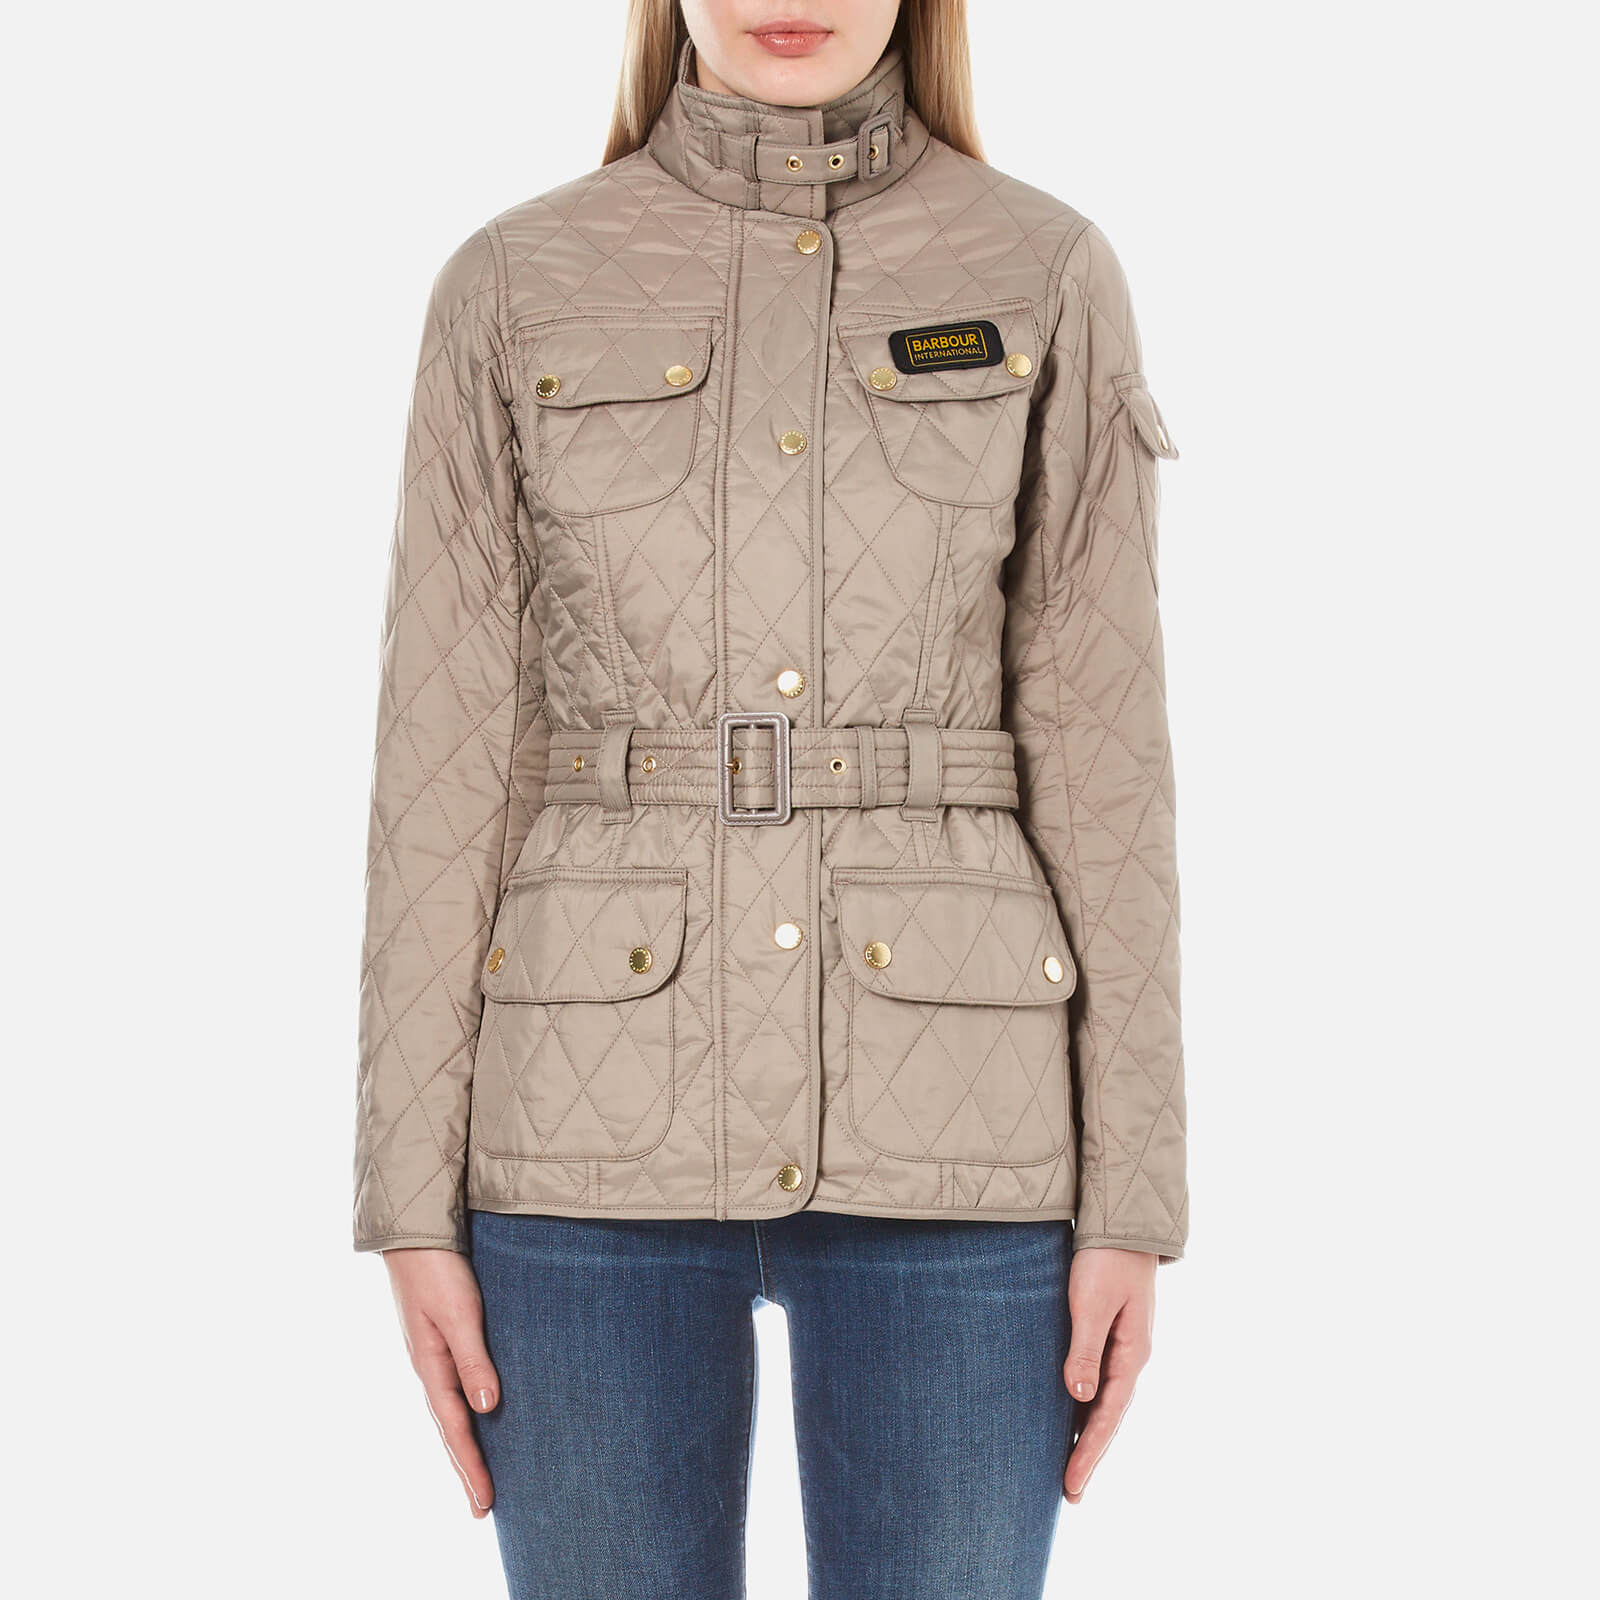 Barbour International Women's Quilt Jacket - Taupe Pearl - UK 10 - Cream